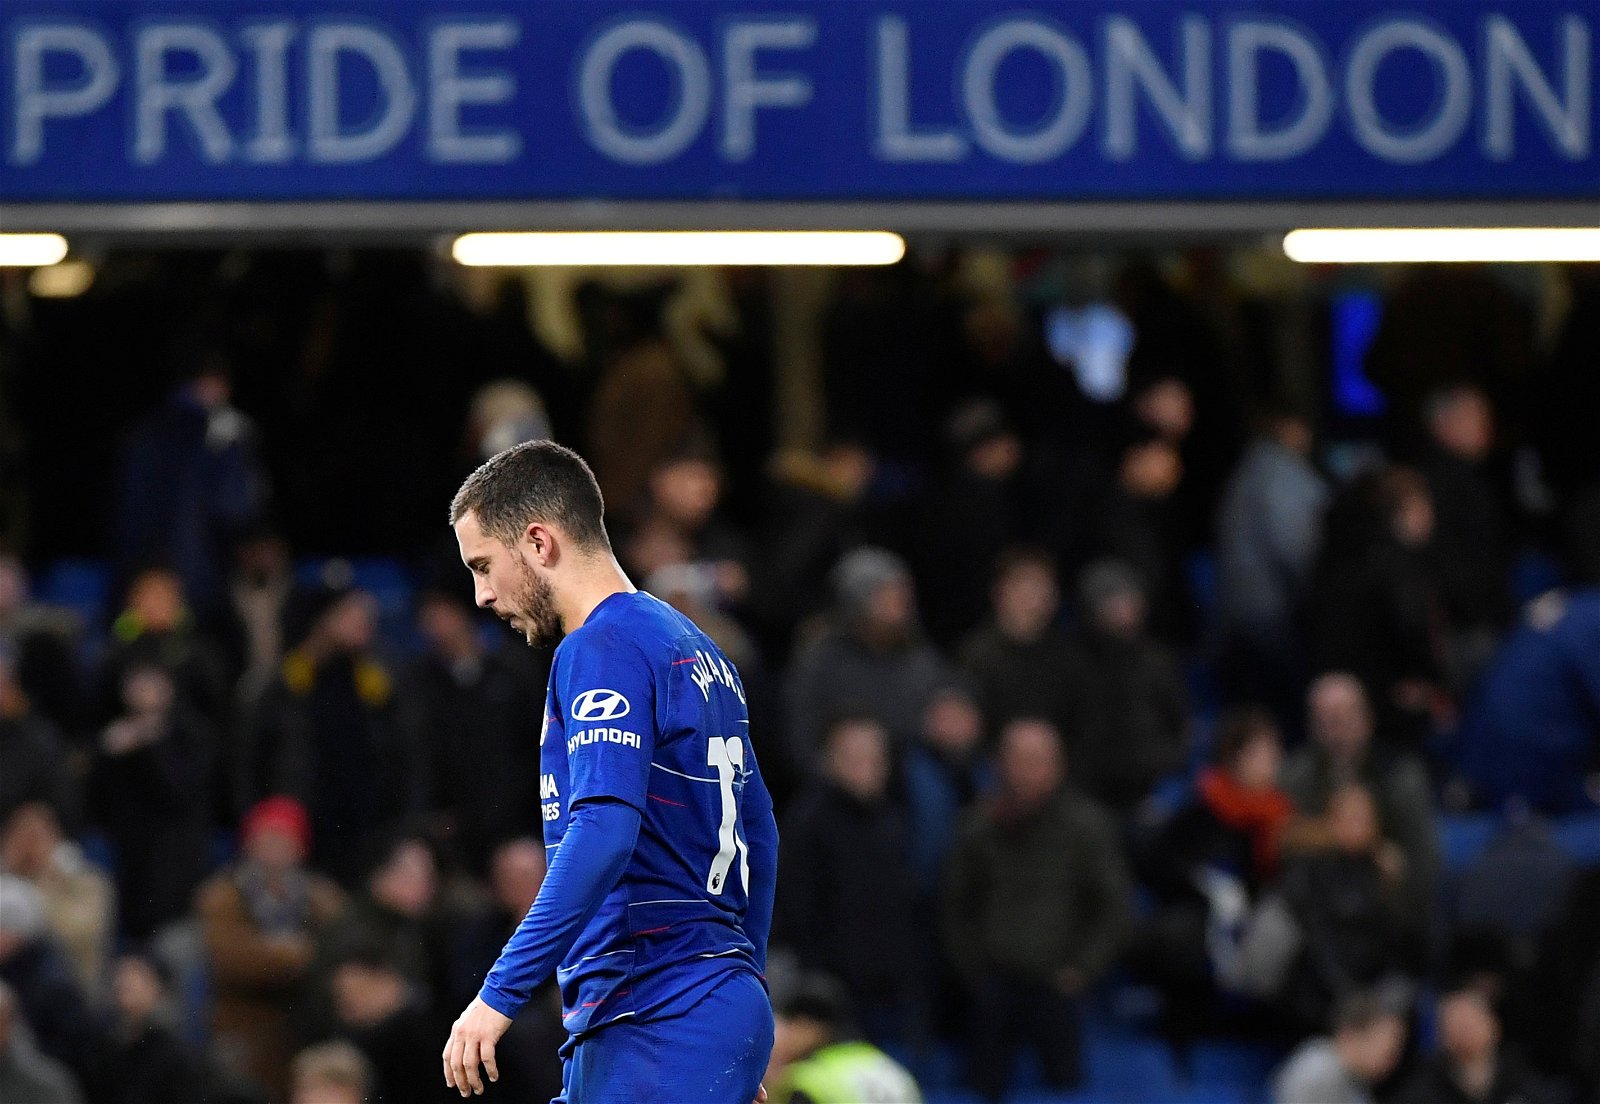 Eden Hazard Requests Fans To Behave Properly In The Carabao Cup Semifinal Against Spurs